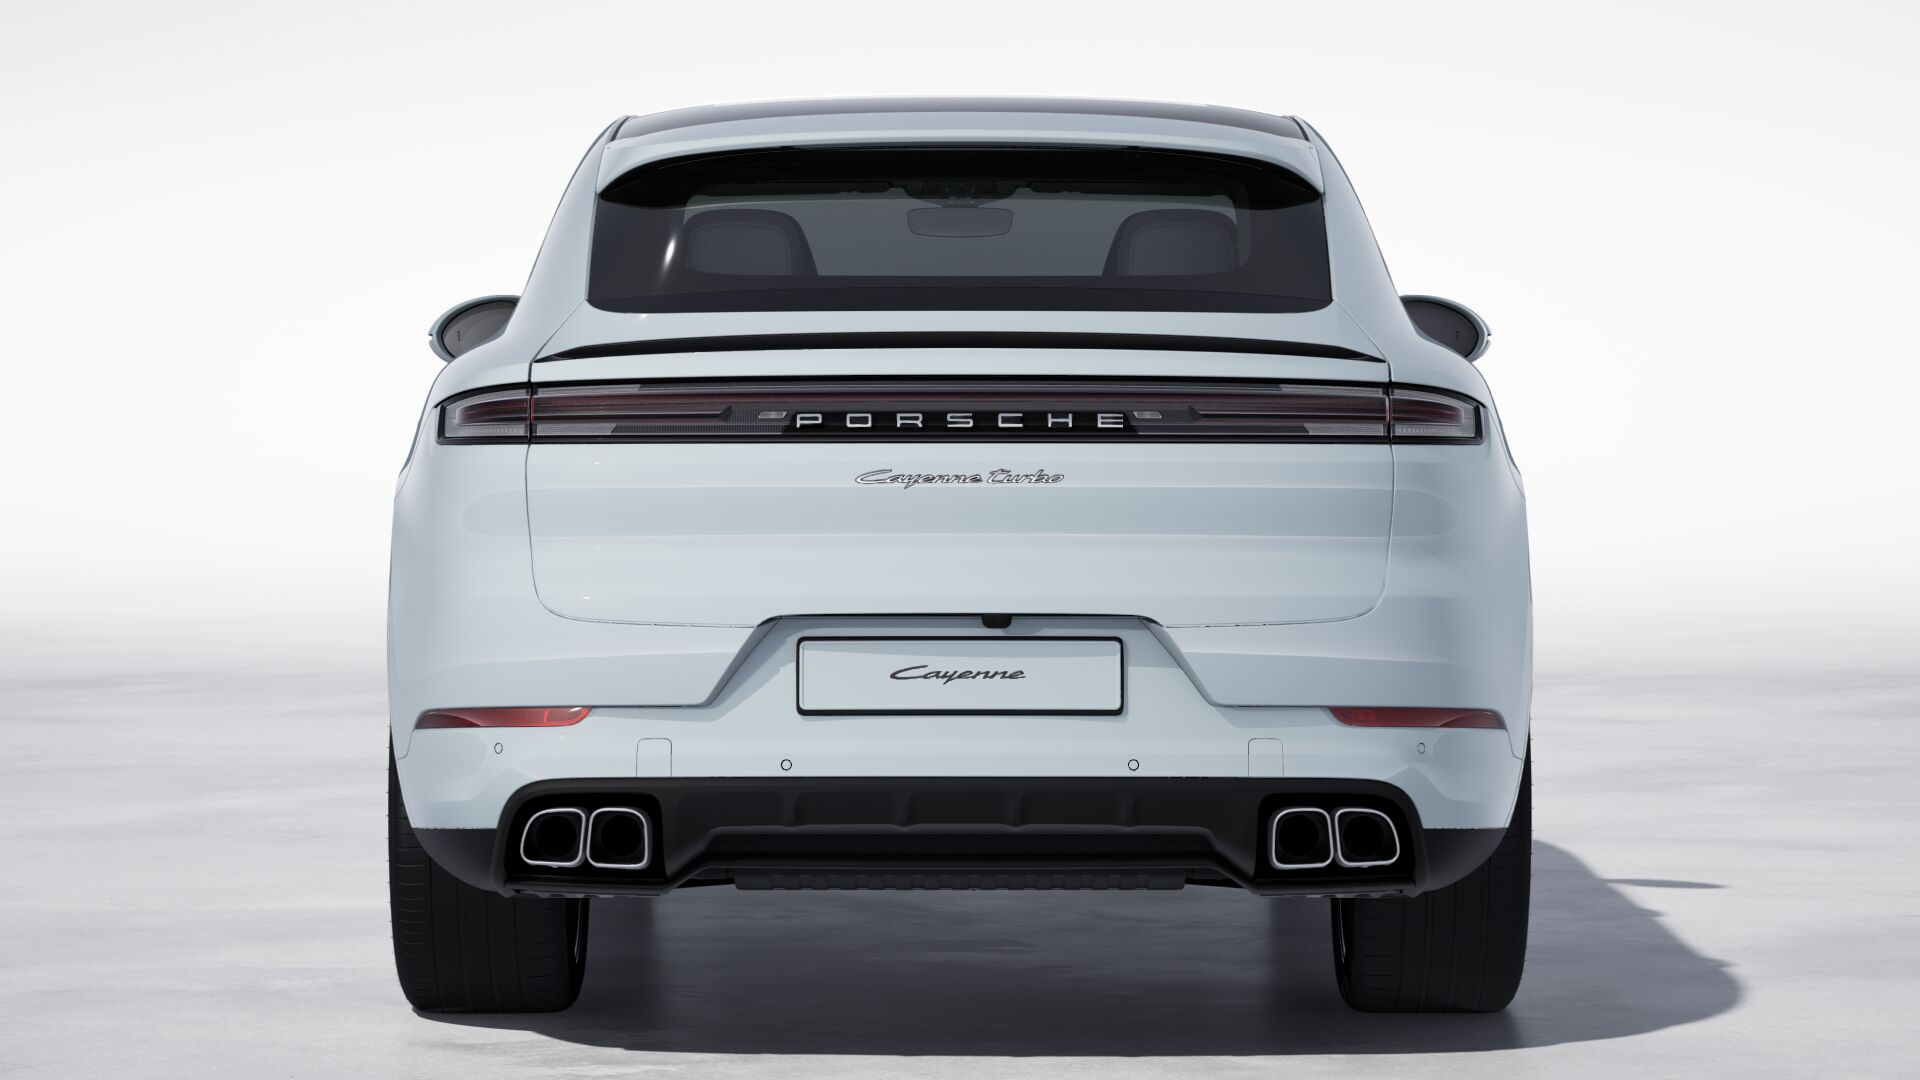 Exterior view of Cayenne Turbo E-Hybrid Coupe